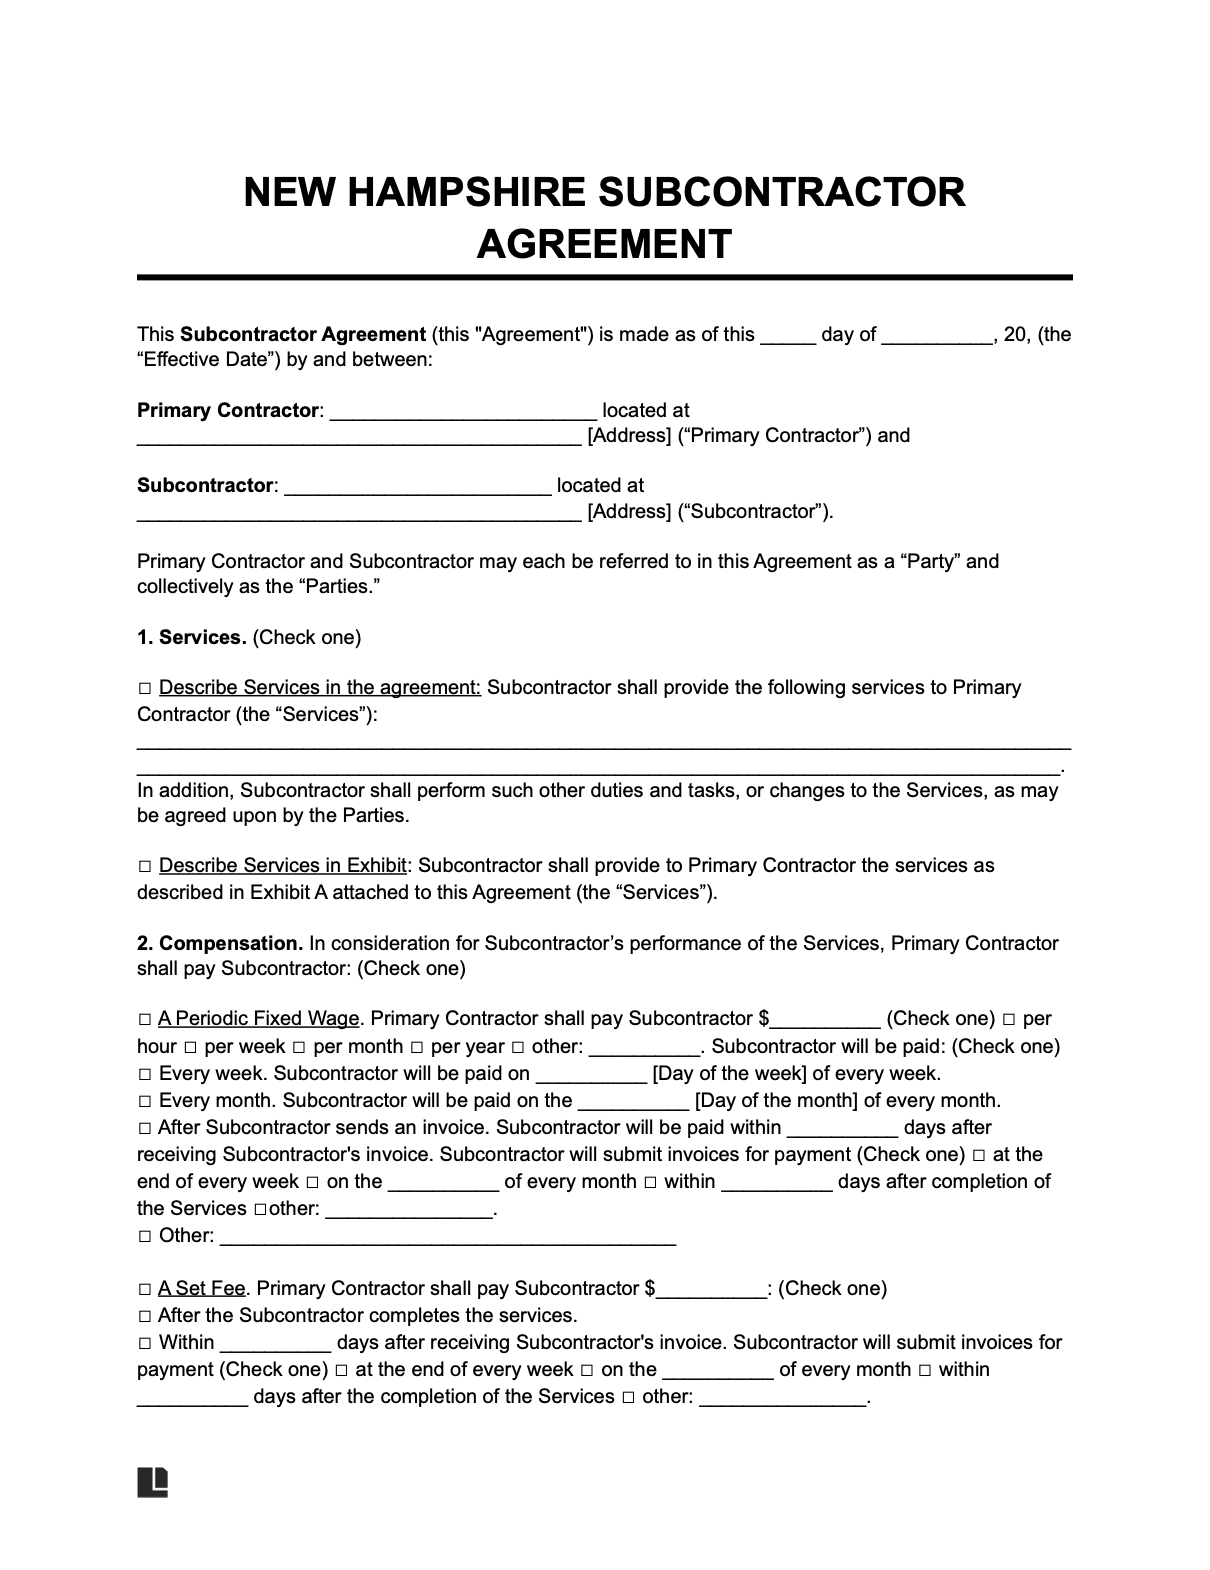 new hampshire subcontractor agreement template